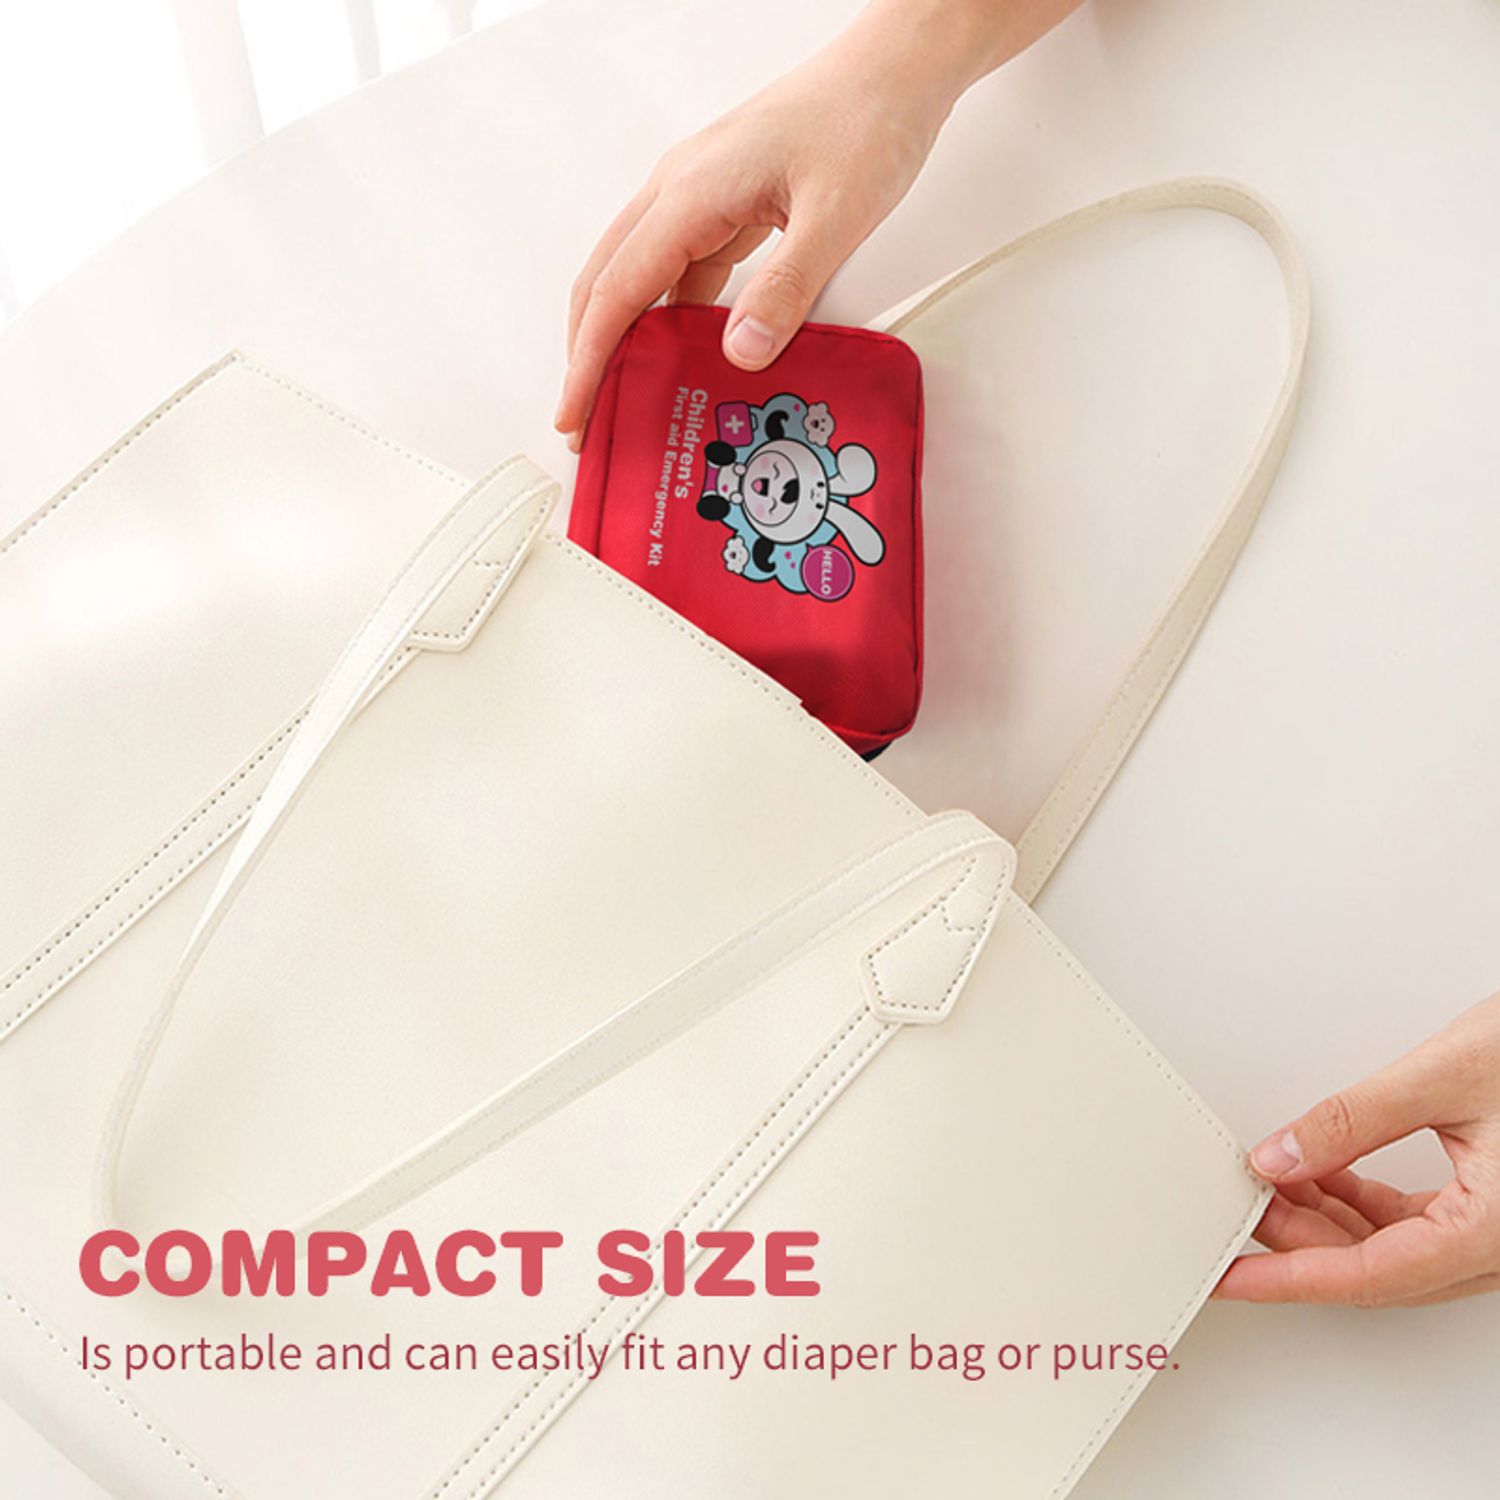 Compact children's first aid pouch in red being placed inside a white diaper bag, illustrating portability and size